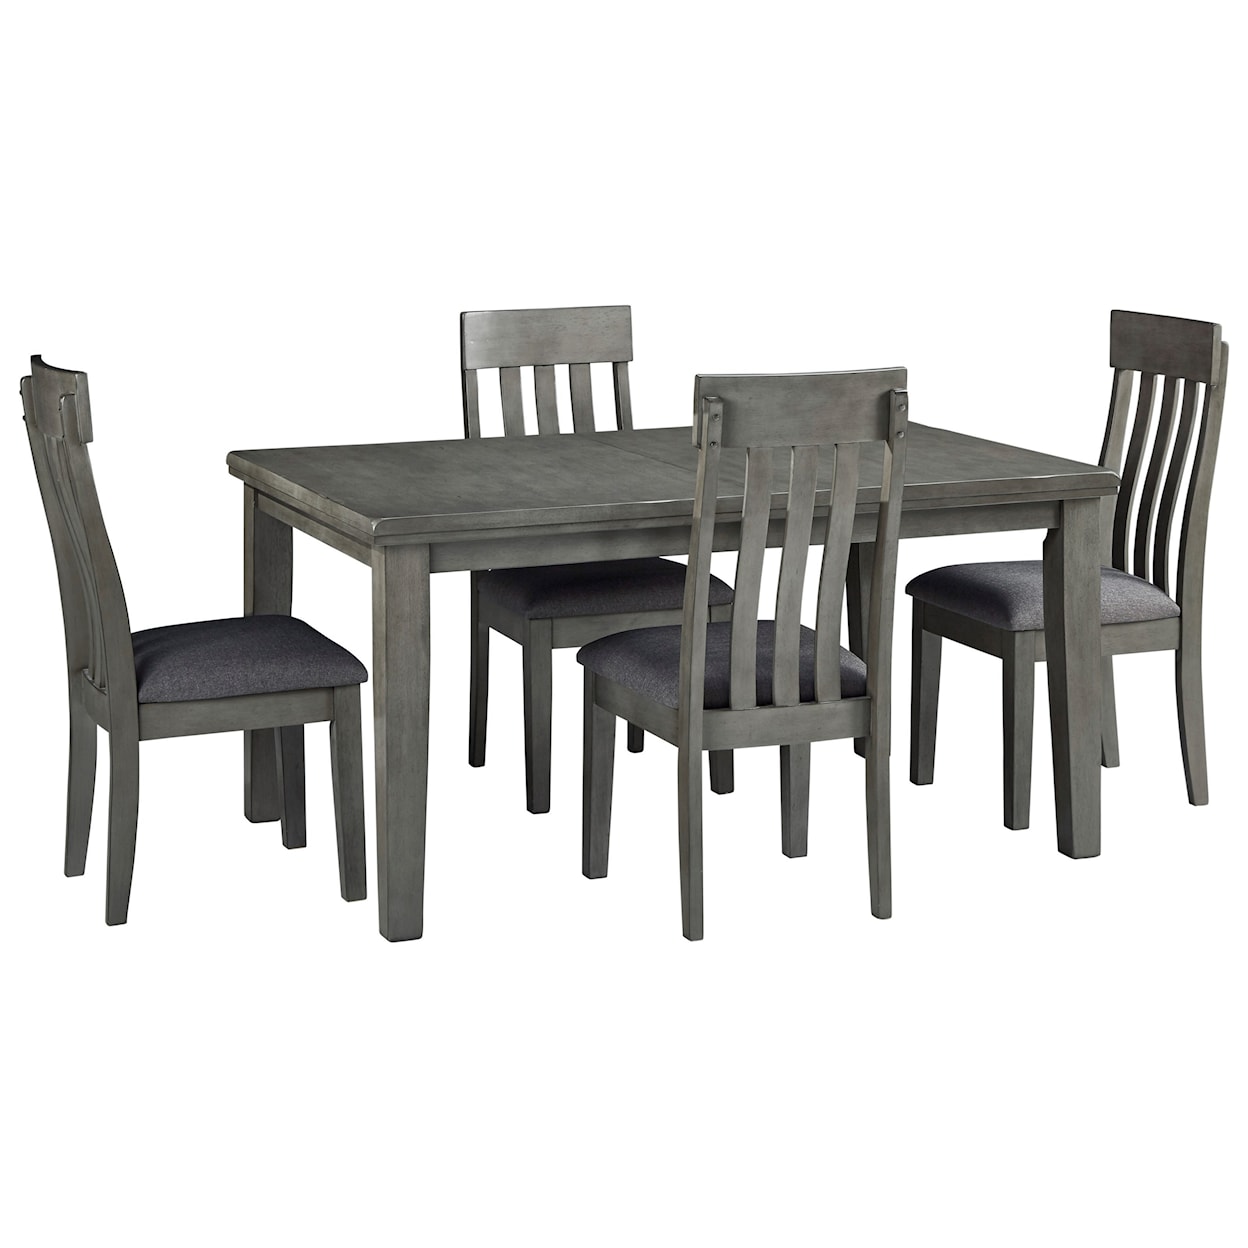 Signature Design by Ashley Hallanden 5-Piece Table and Chair Set